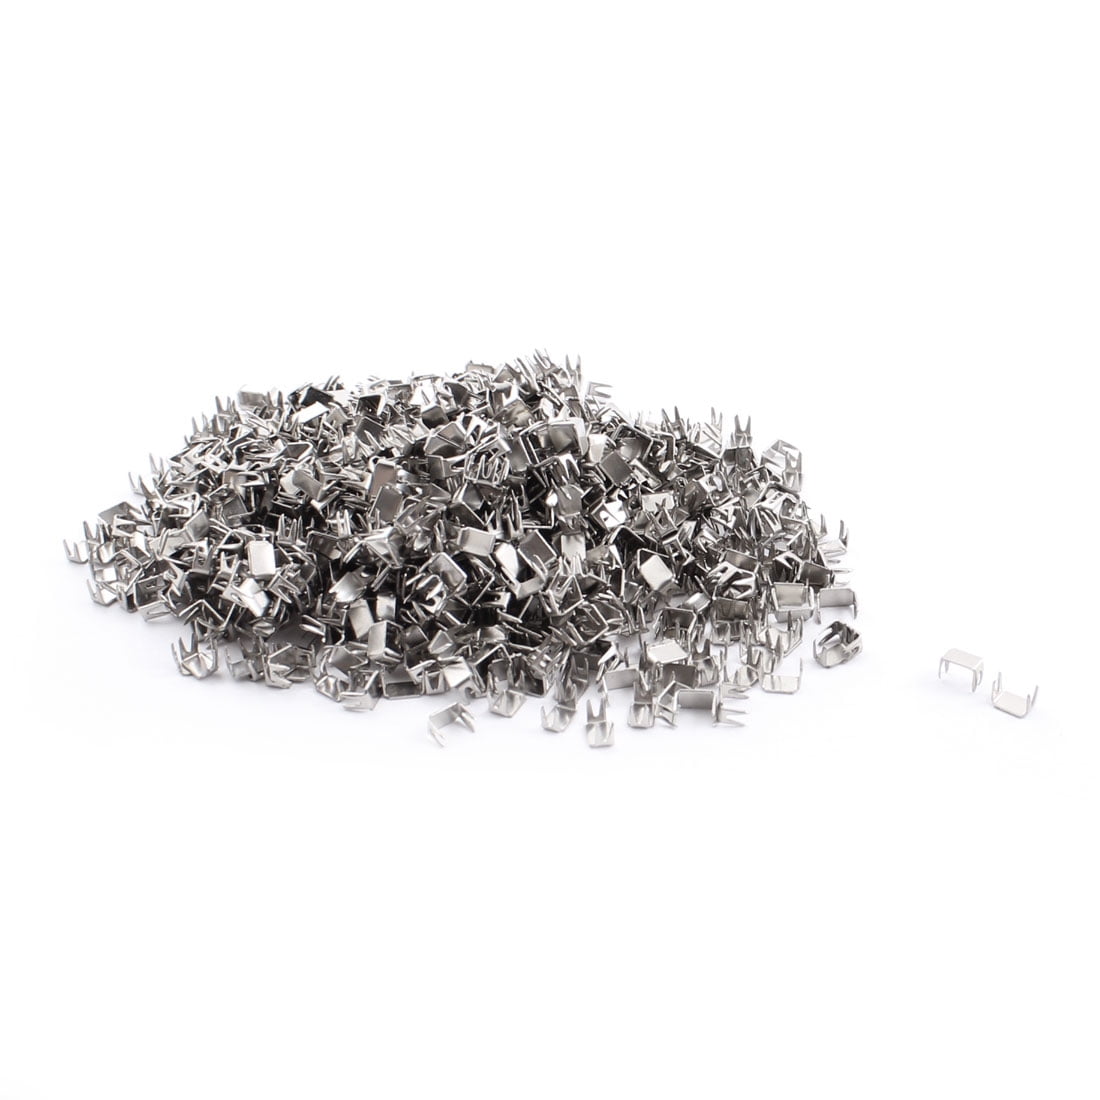 uxcell Zipper Slider Replacement Bottom Stopper Stop Kit Silver Tone 500 Pcs